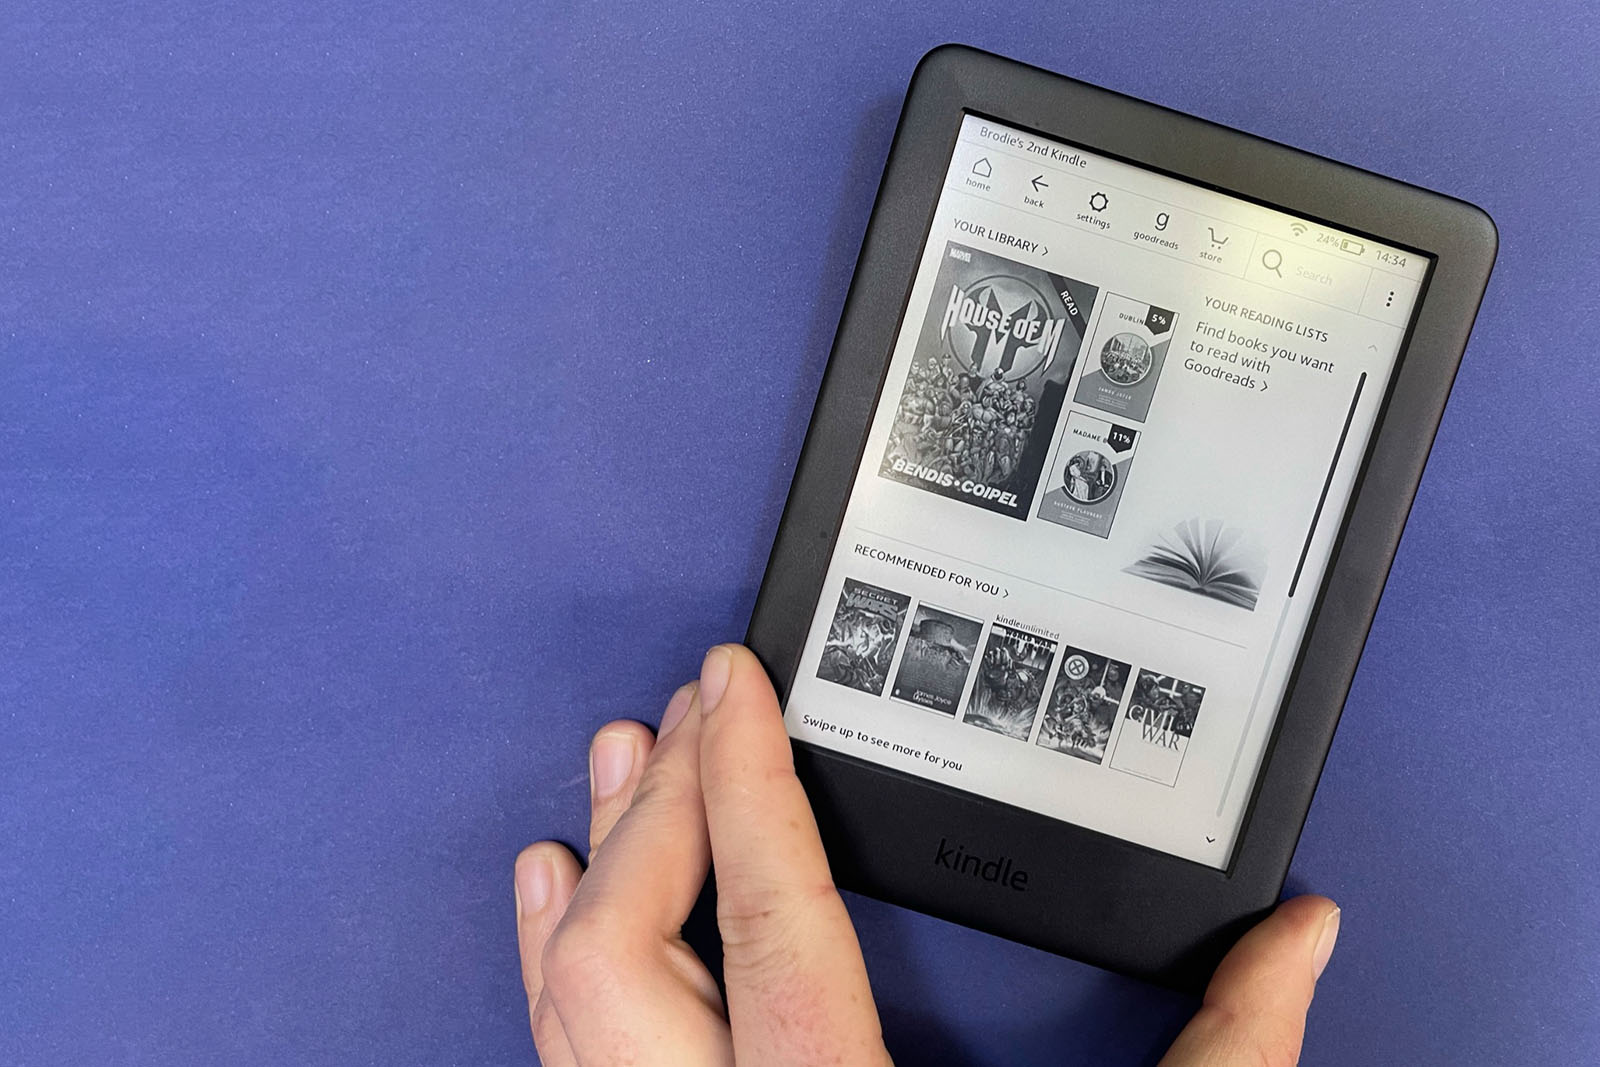 Kindle Oasis (2019) review